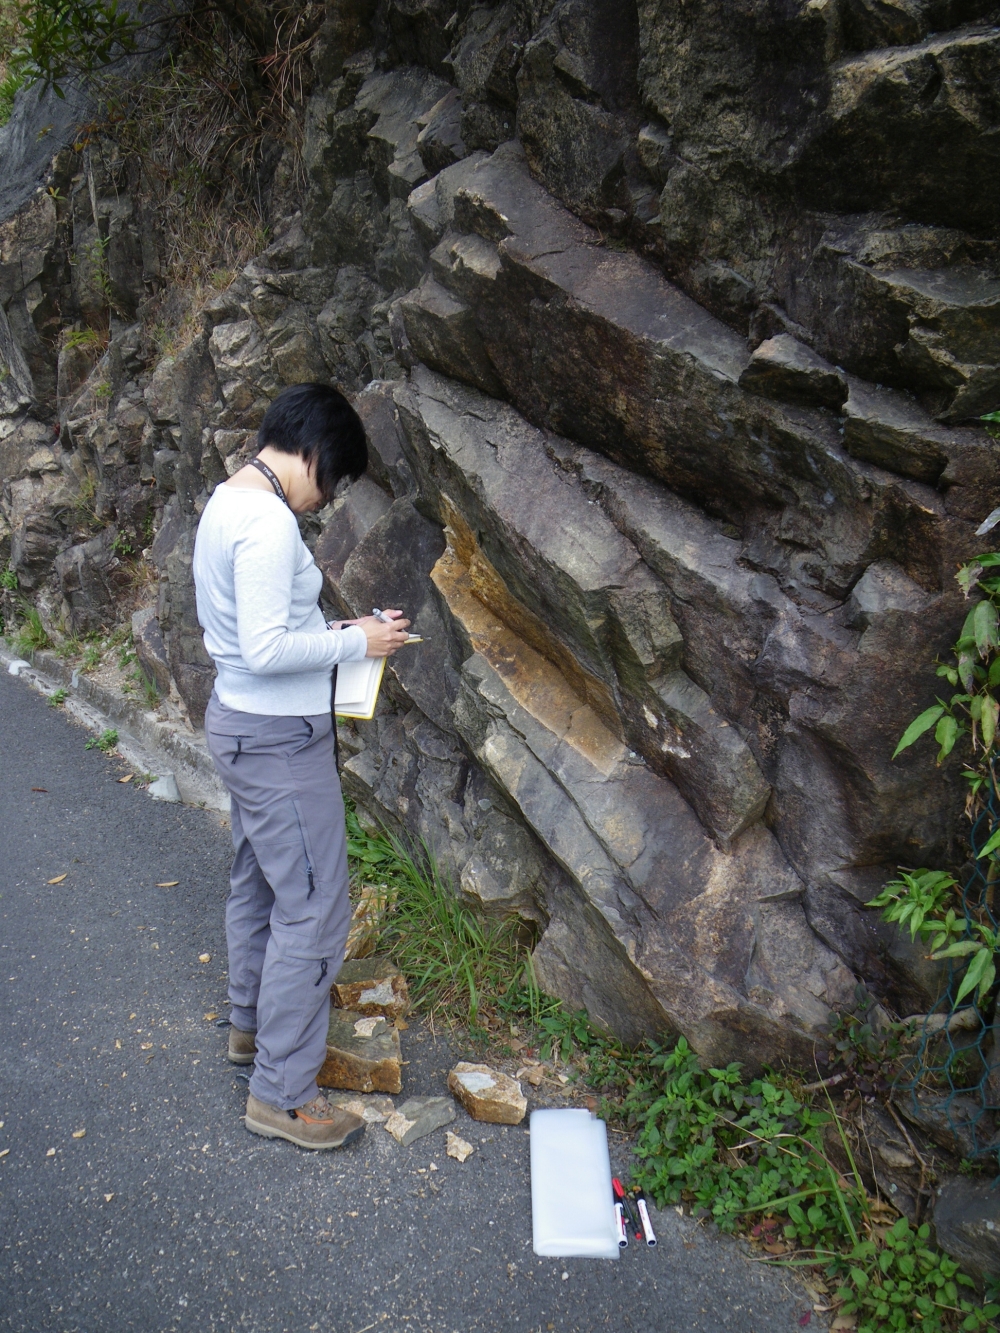 During a field trip, colleagues of Hong Kong Geological Survey study and describe the rock types and their properties, carry out on-site geological and structural measurements, and record field observations in details. If necessary, they collect some rock samples for further laboratory testing and analysis.